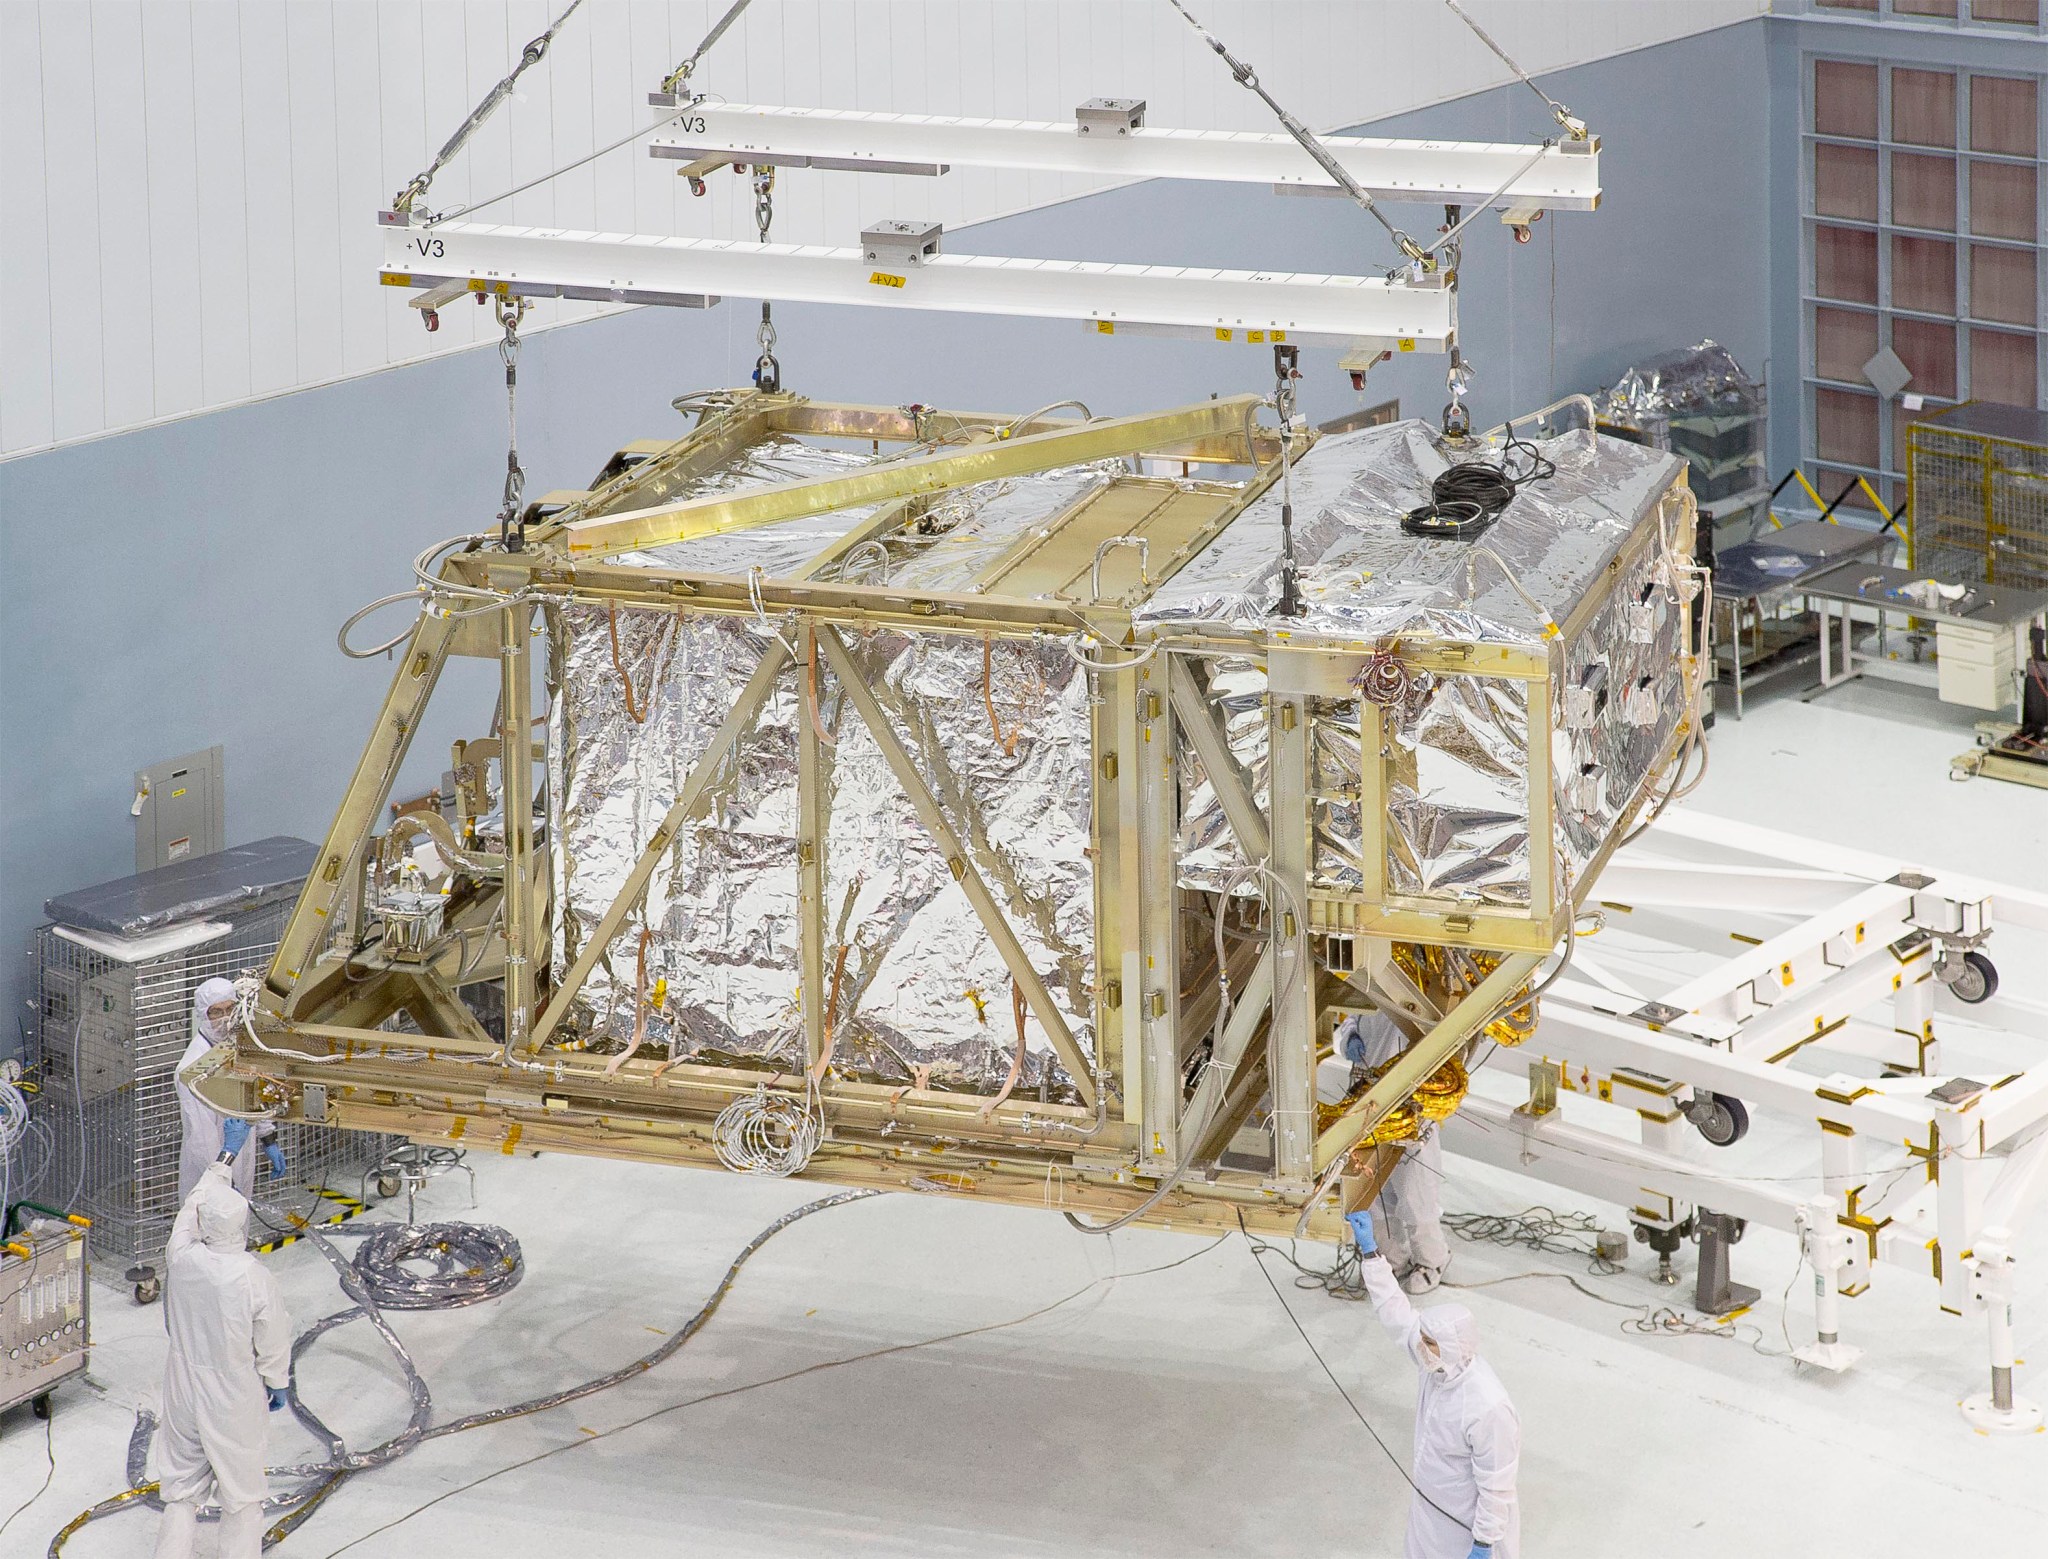 JWST being lifted by crane into the thermal vac chamber.